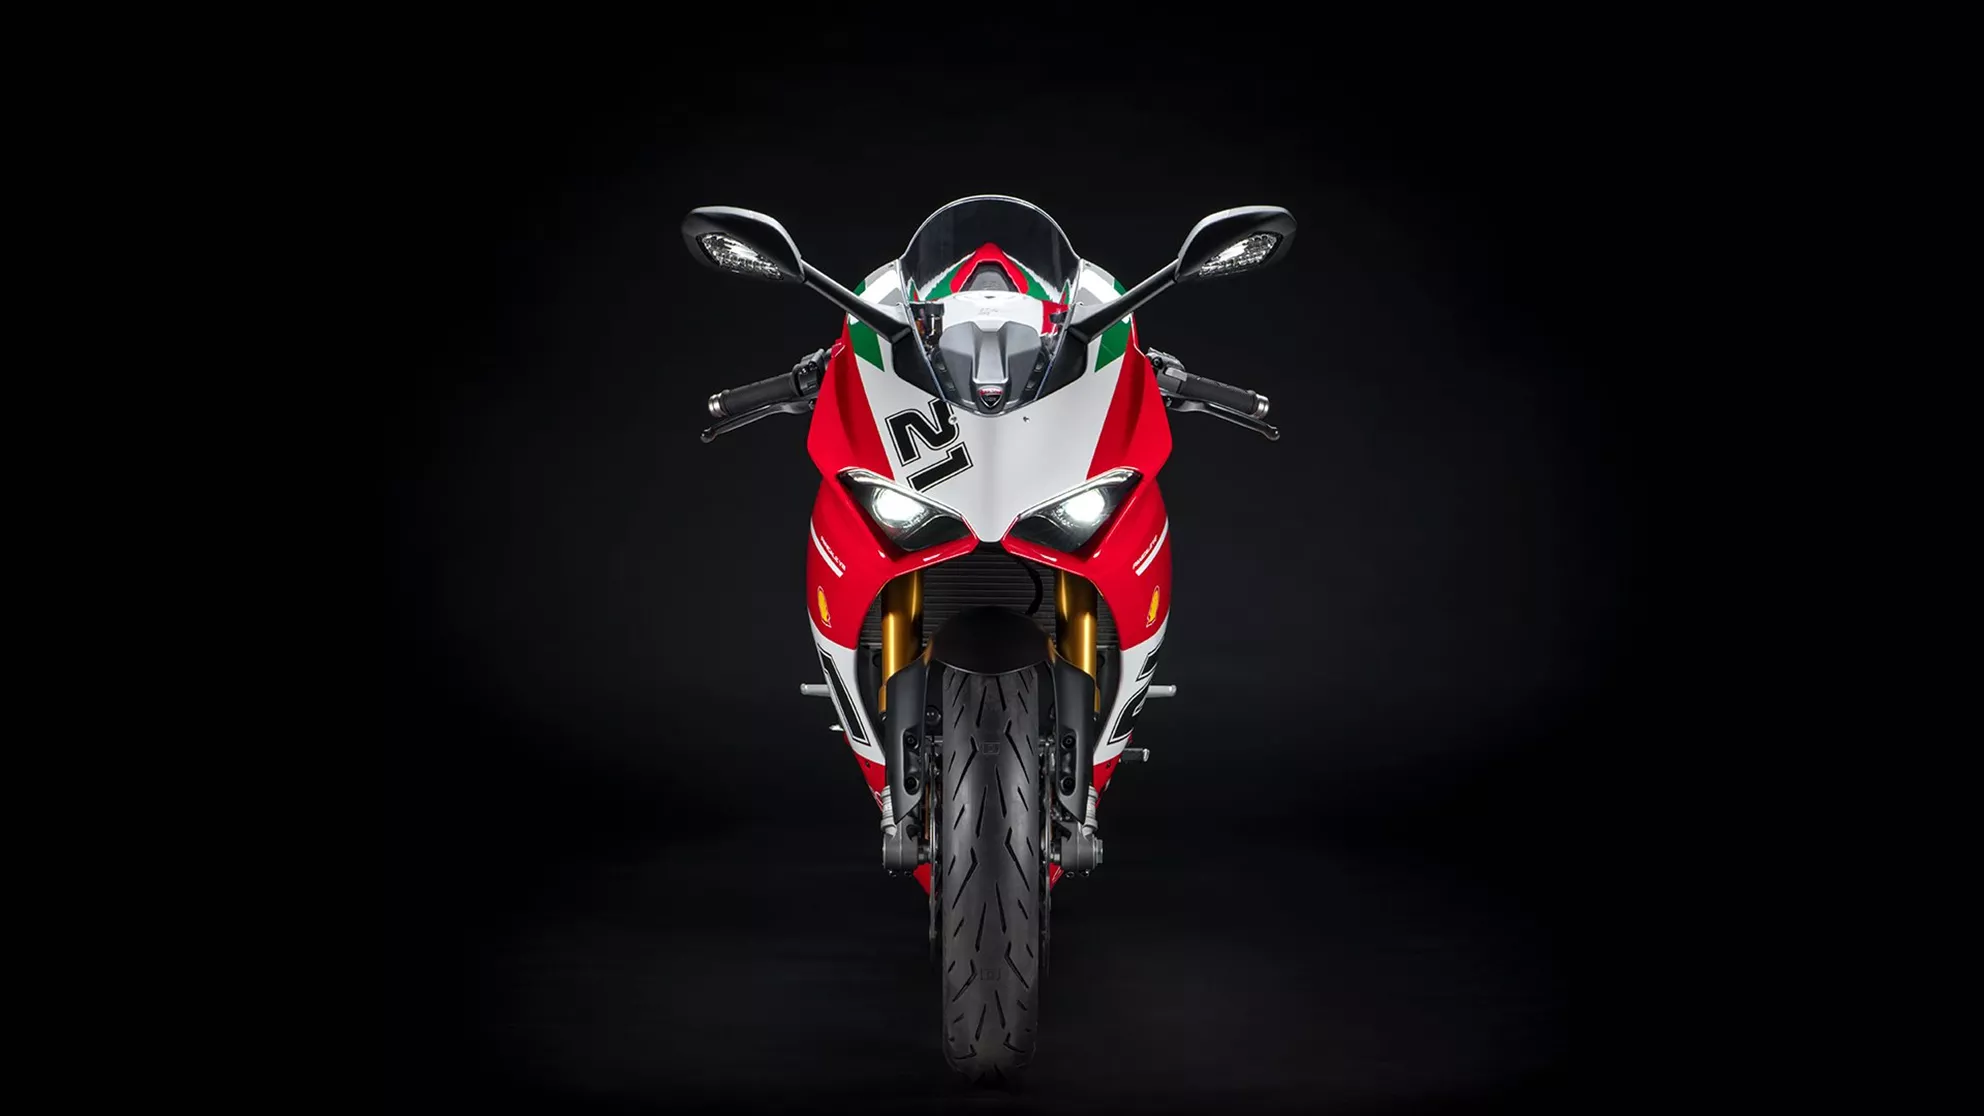 Ducati Panigale V2 Bayliss Edition - Immagine 8